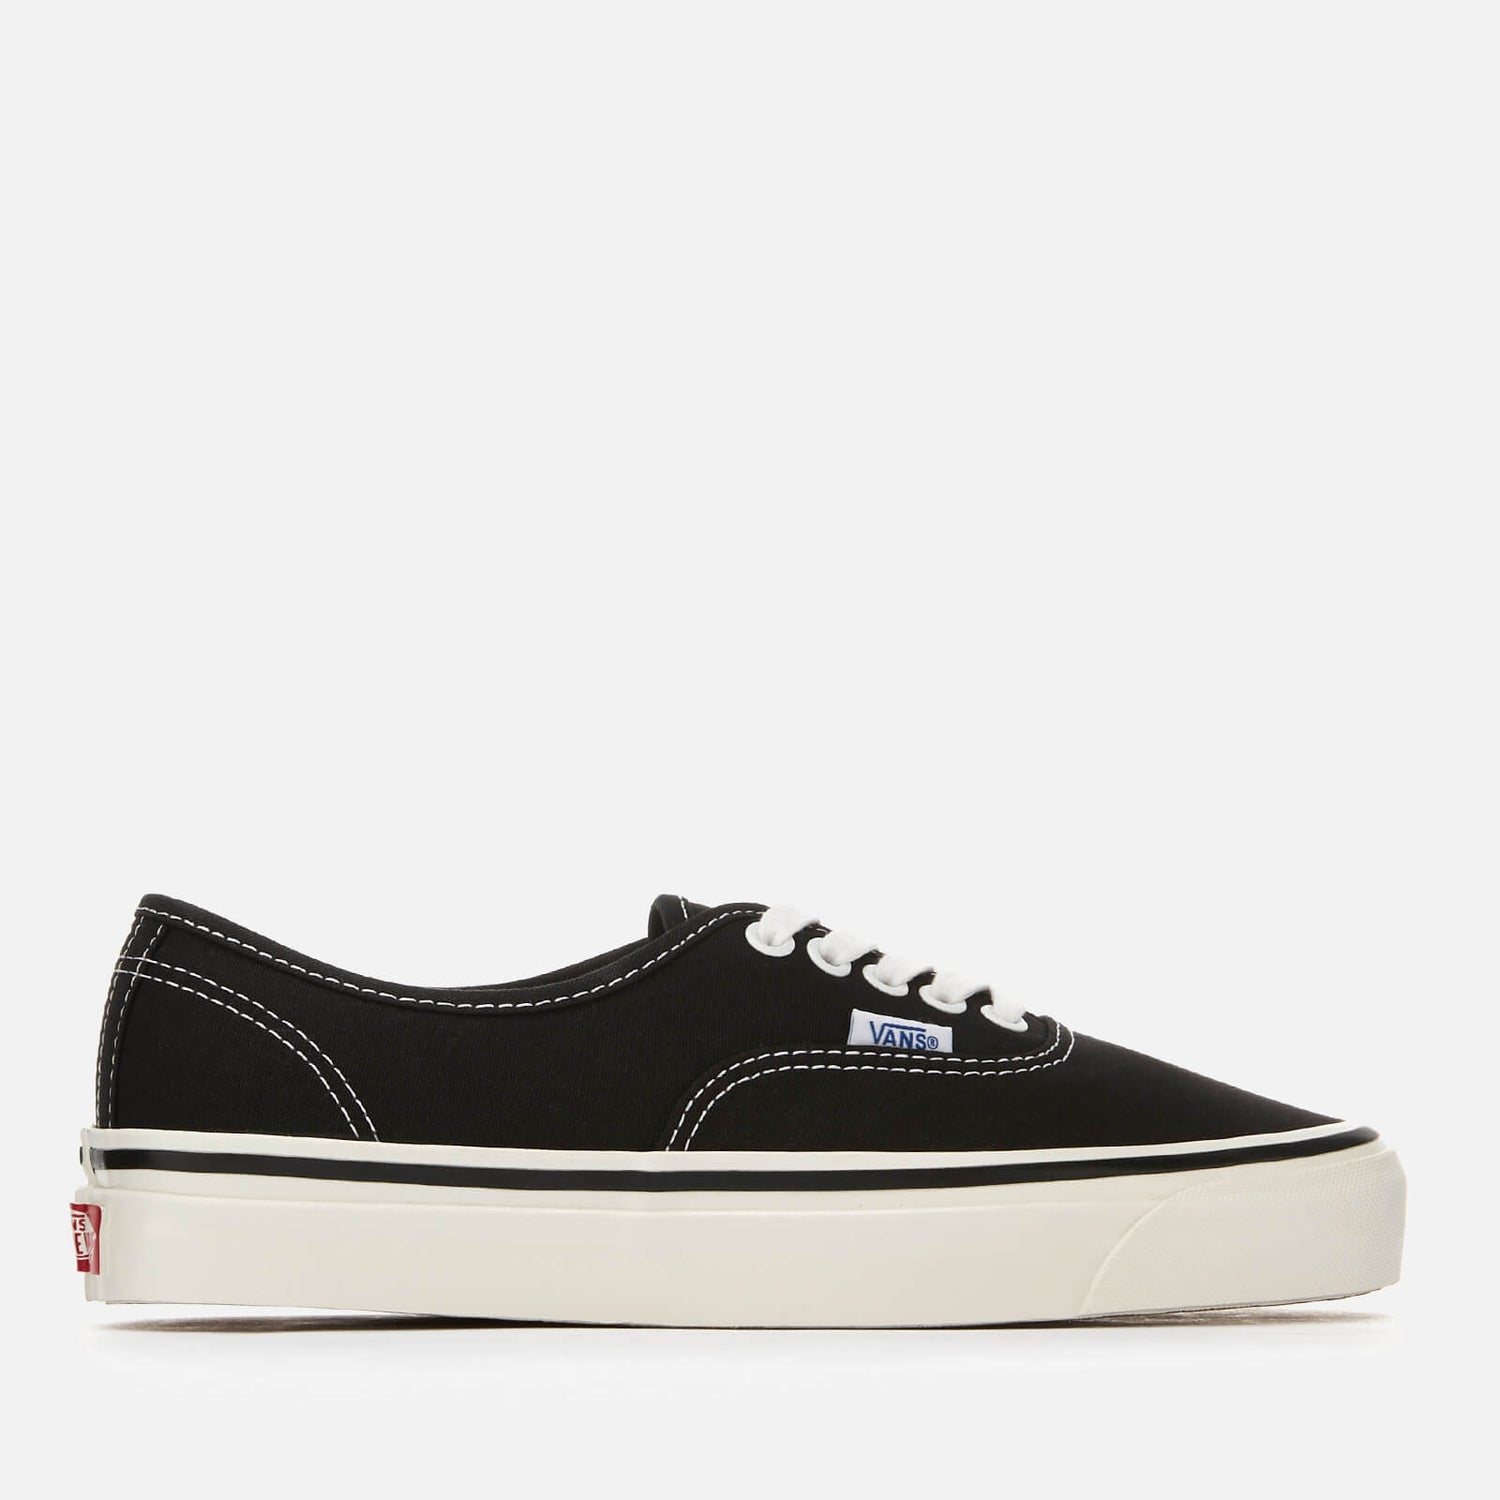 Vans Anaheim Authentic 44 Dx Trainers - Black - Free UK Delivery Available